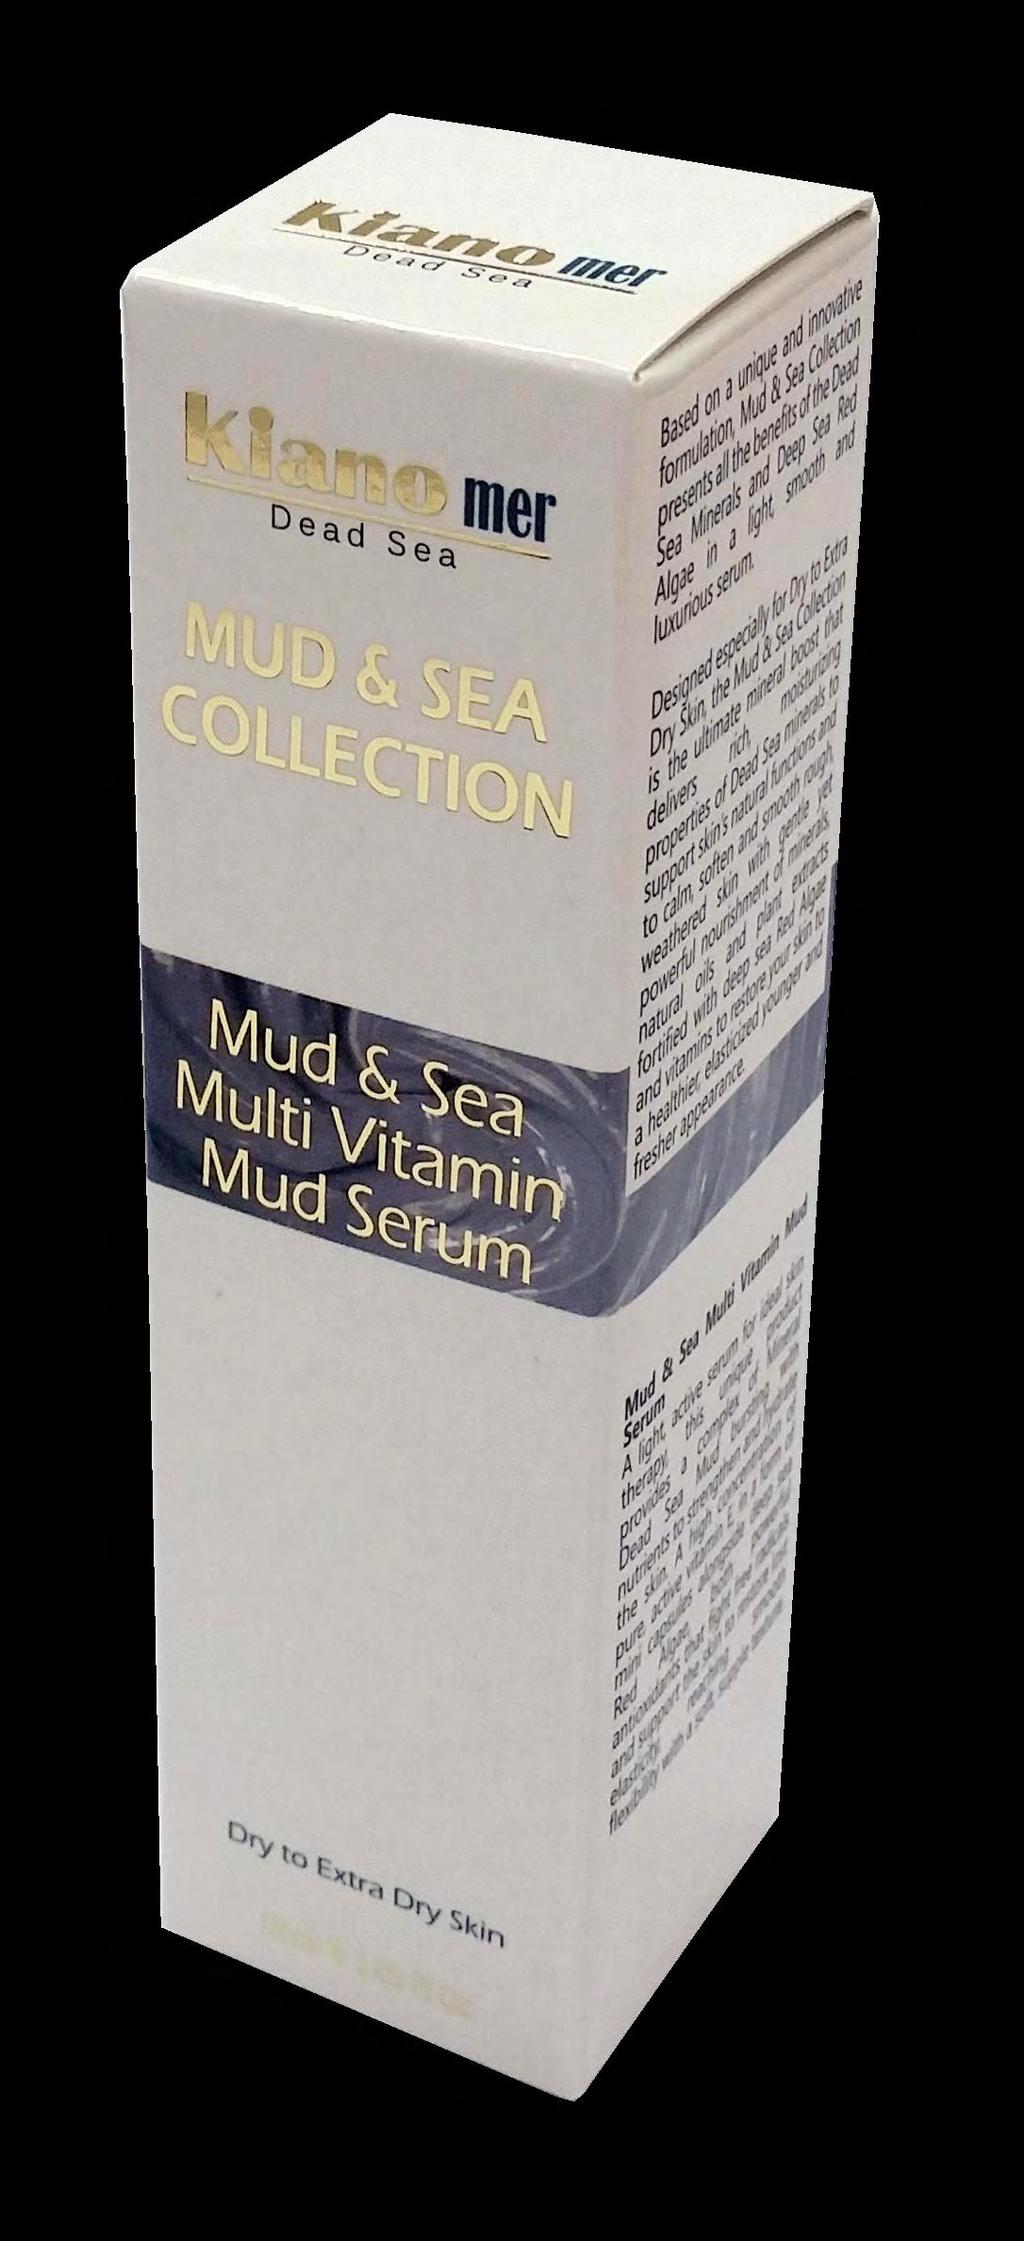 Mud & Sea Multi Vitamin Mud Serum A light, active serum for ideal skin therapy, this unique product provides a complex of Mineral Dead Sea Mud bursting with nutrients to strengthen and hydrate the